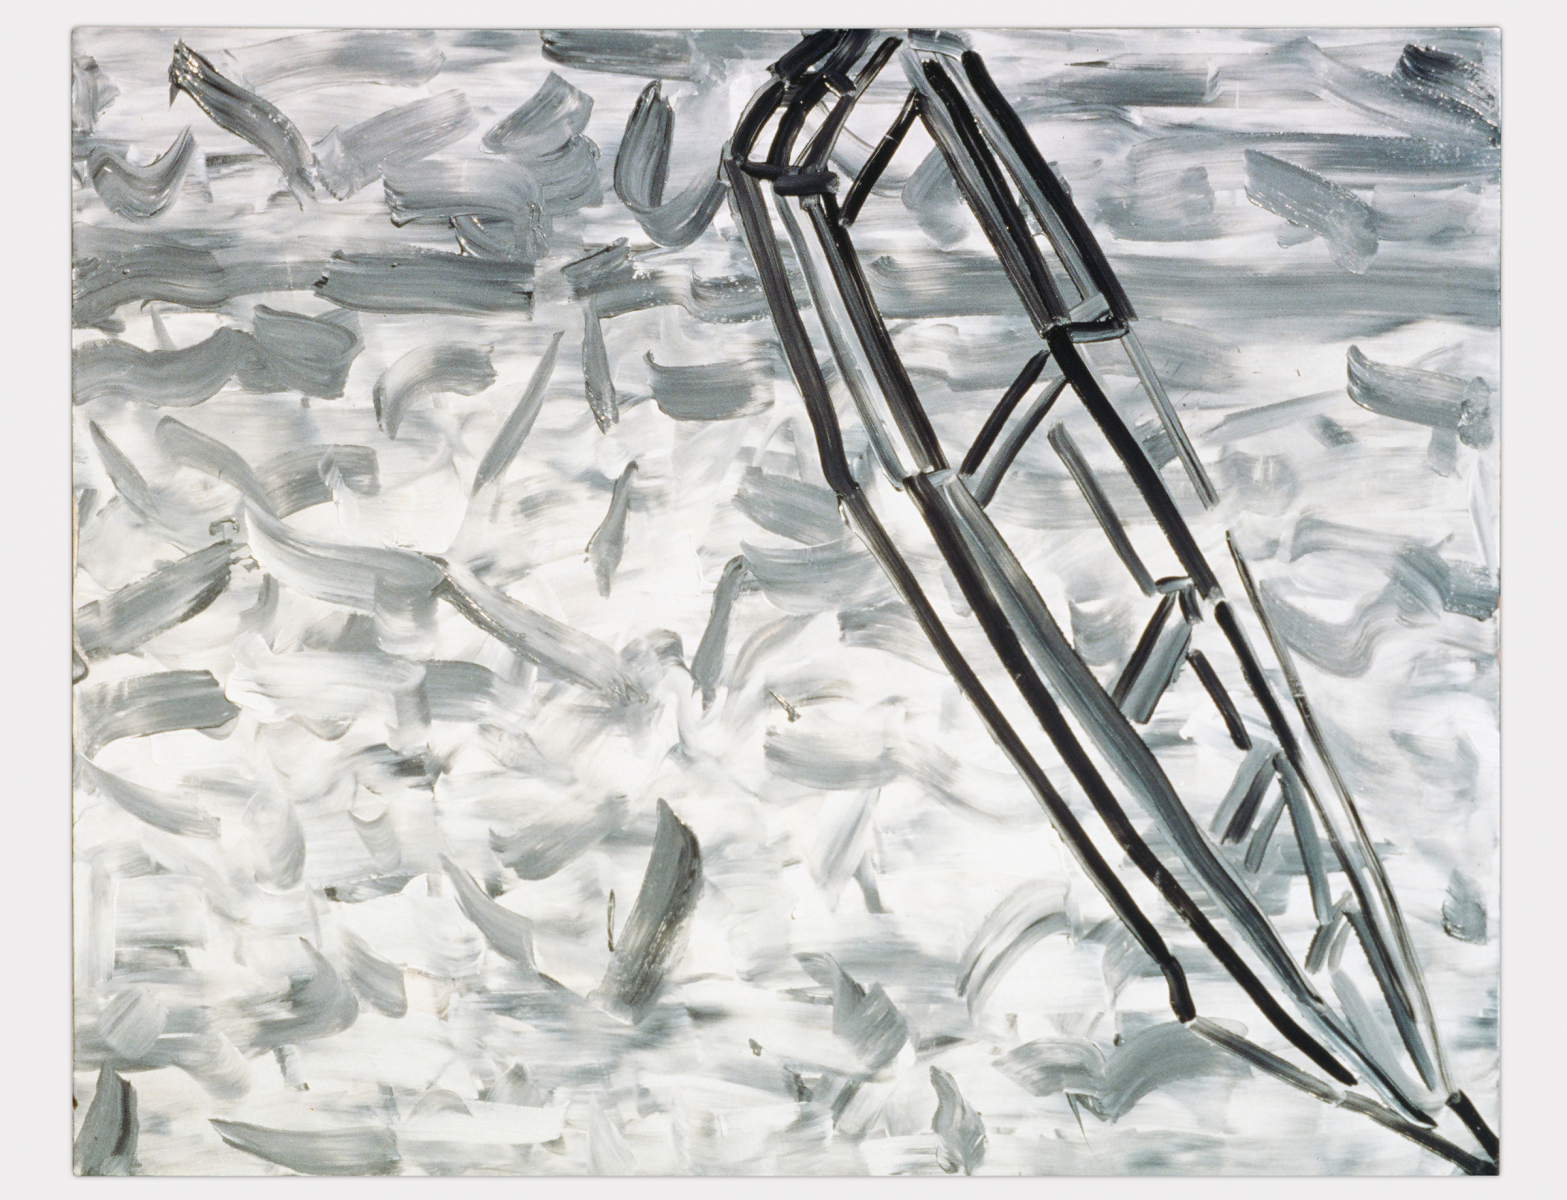 Untitled-88015, 1988, Oil on Canvas, 130.3x162cm